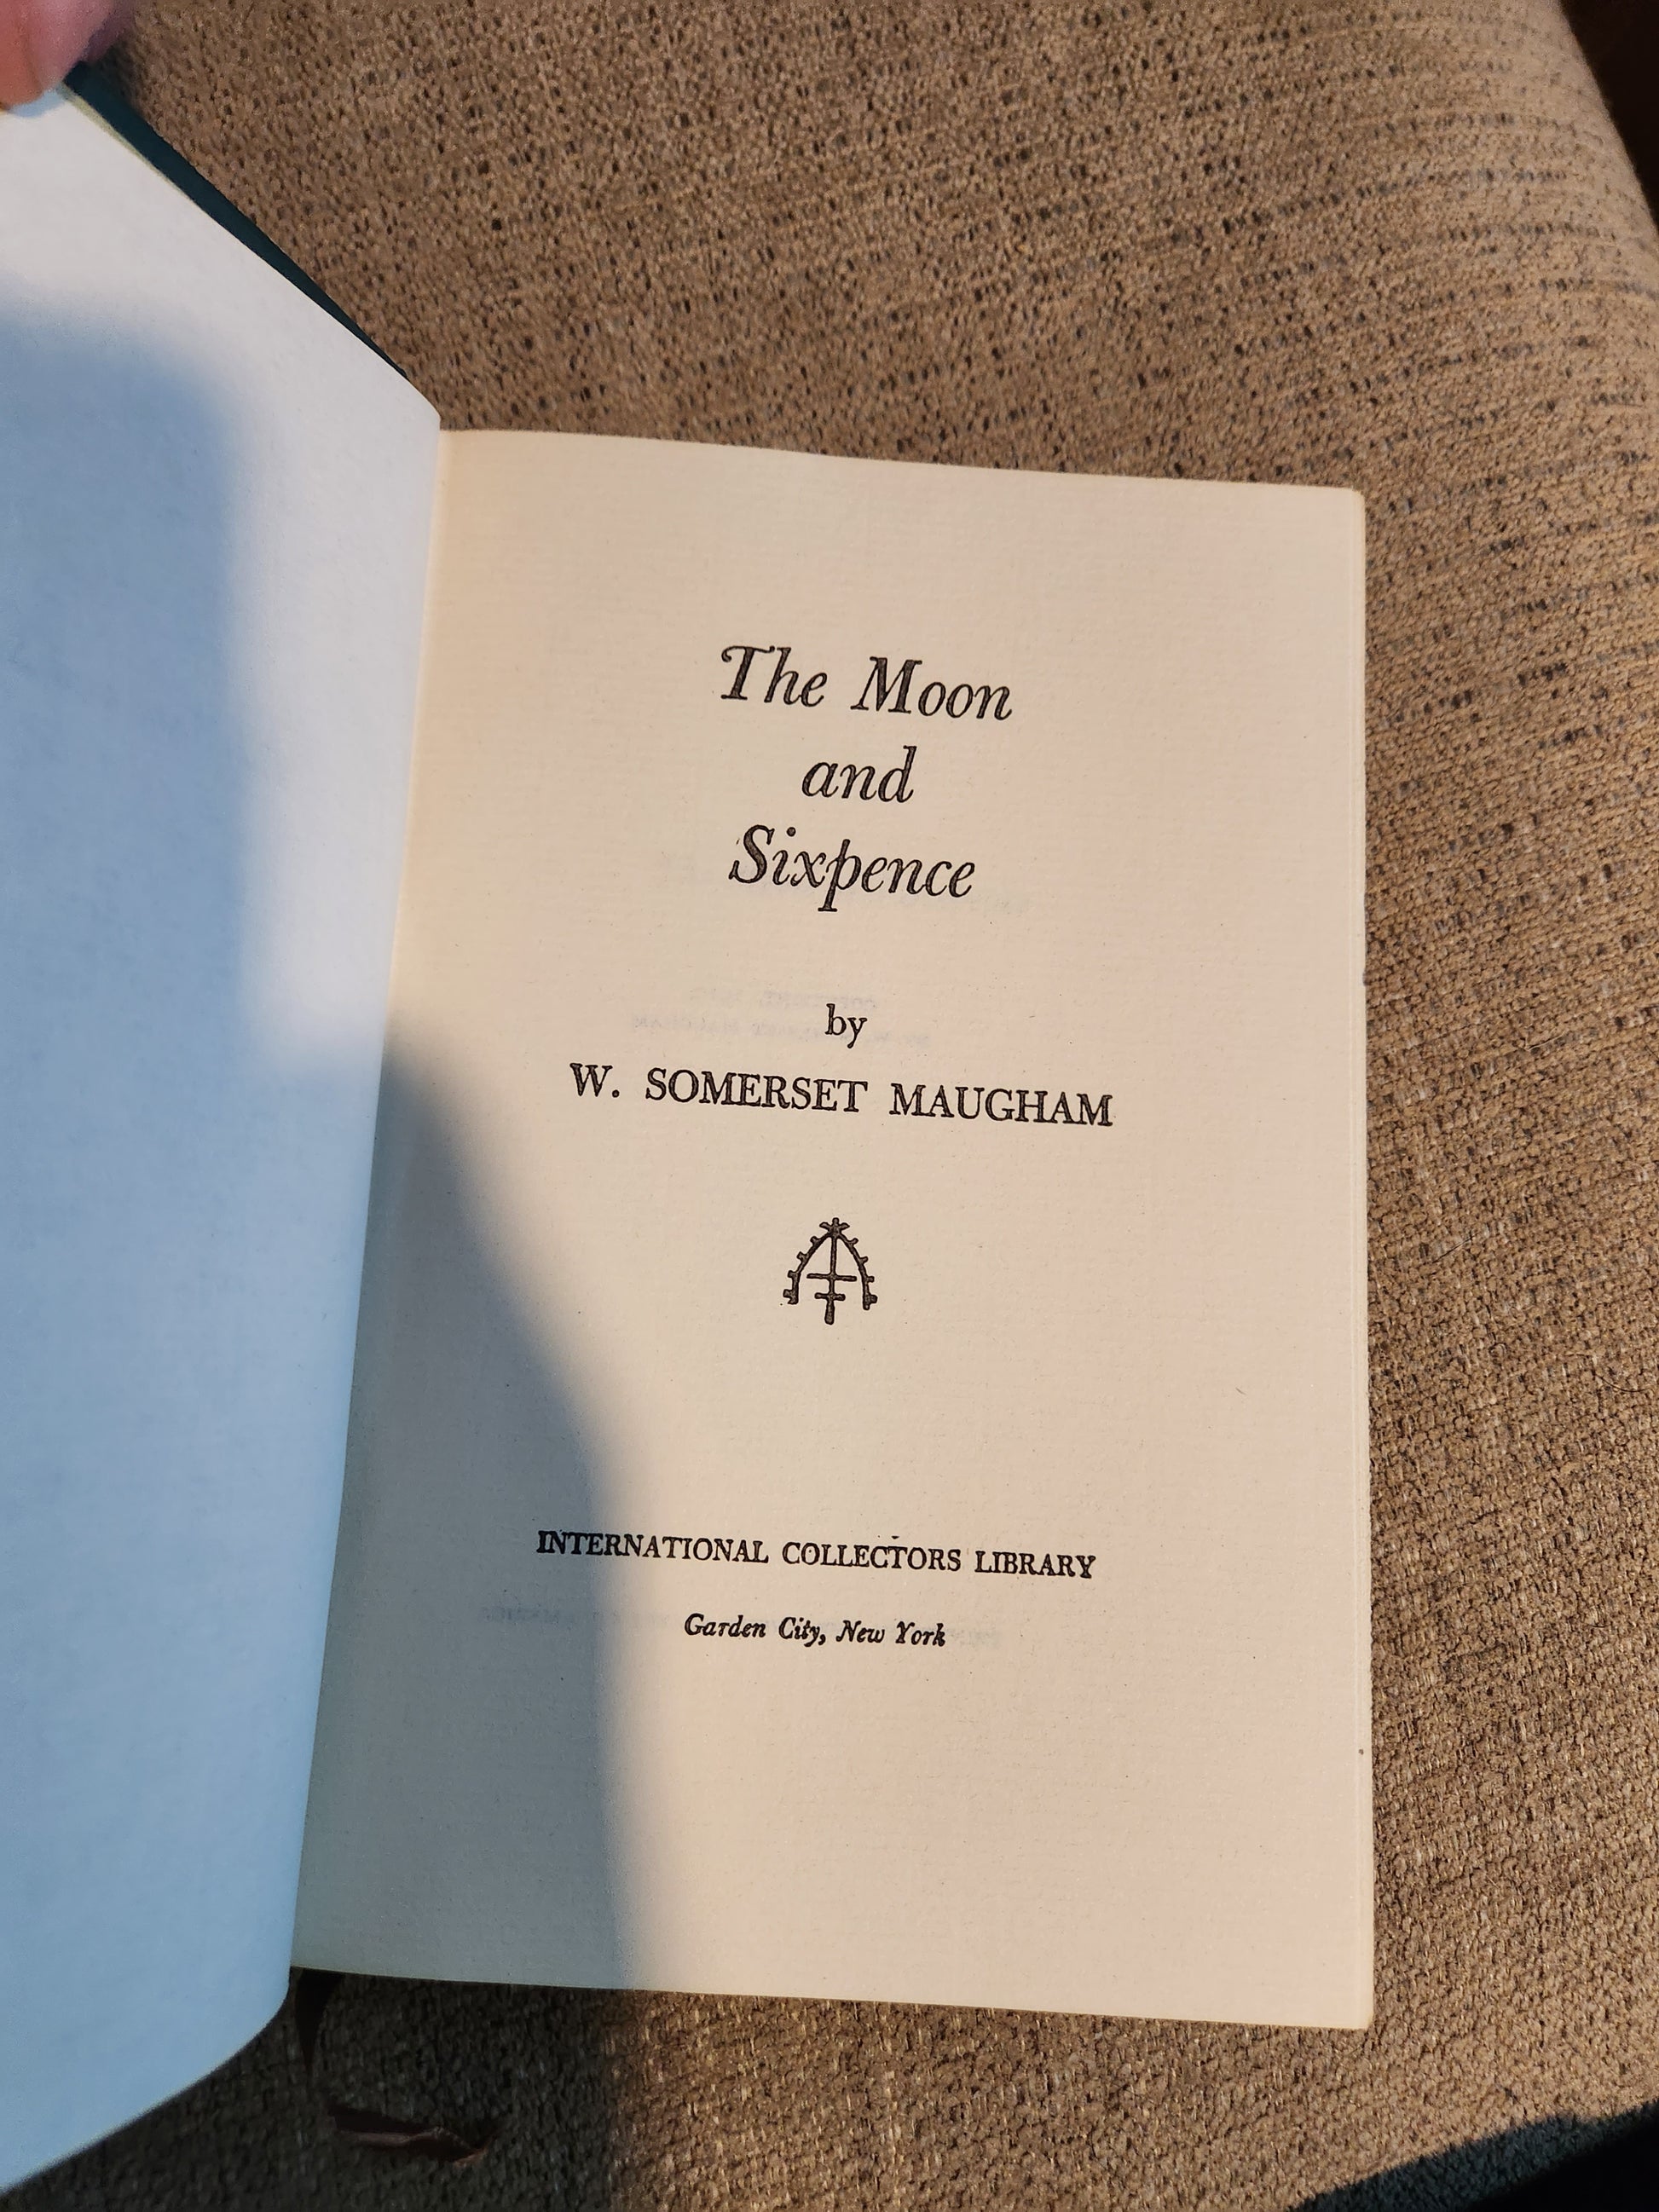 "The Moon and Sixpence" by W. Somerset Maugham - Dead Tree Dreams Bookstore